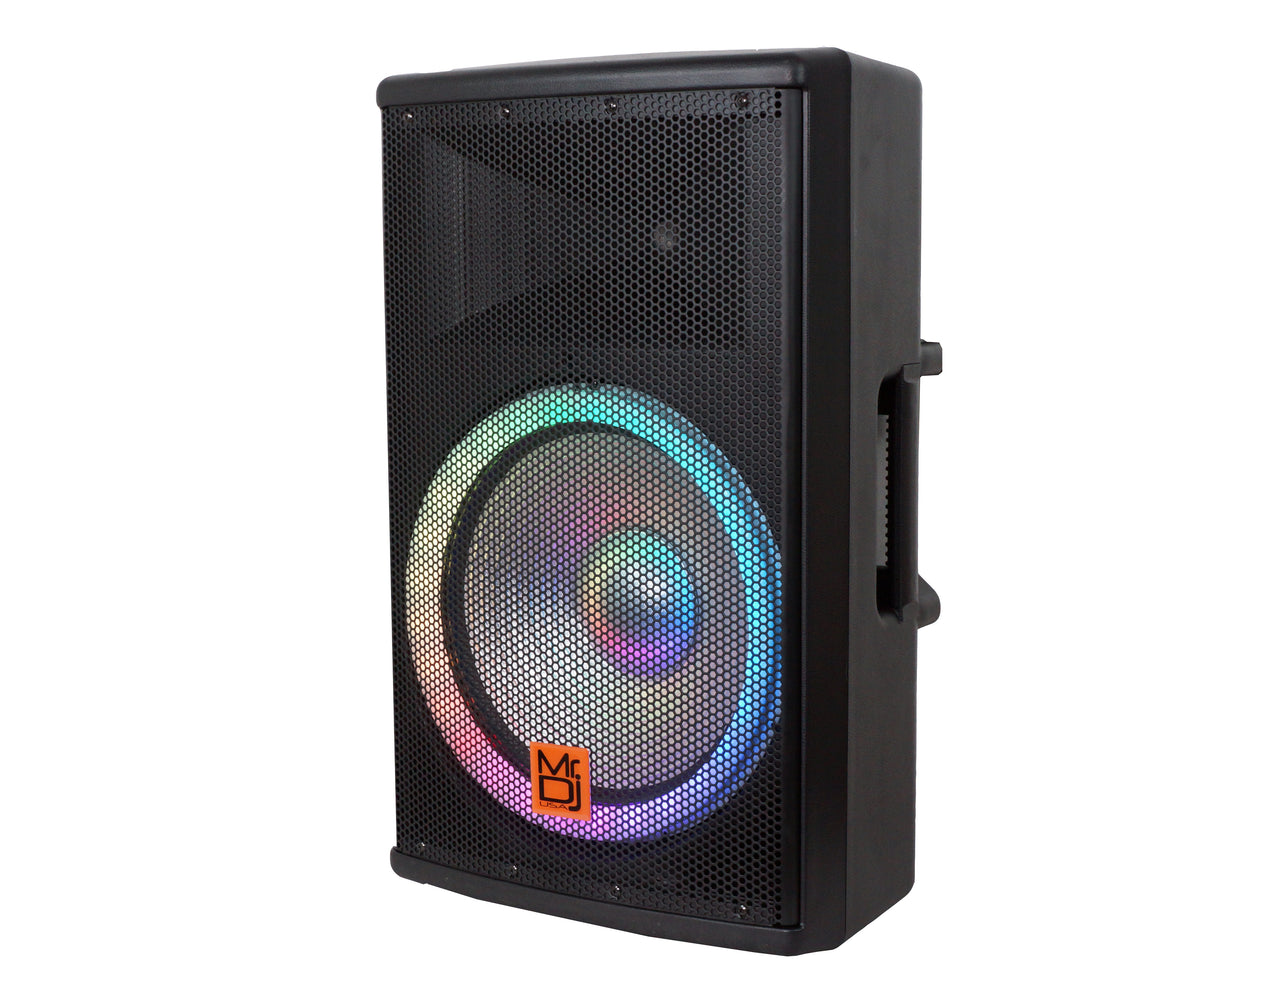 MR DJ SYNERGY15 15" Wireless Portable PA Speaker System 4500W Powered Bluetooth Indoor & Outdoor DJ Stereo Loudspeaker with USB SD MP3 AUX Input, Flashing Party Light & FM Radio